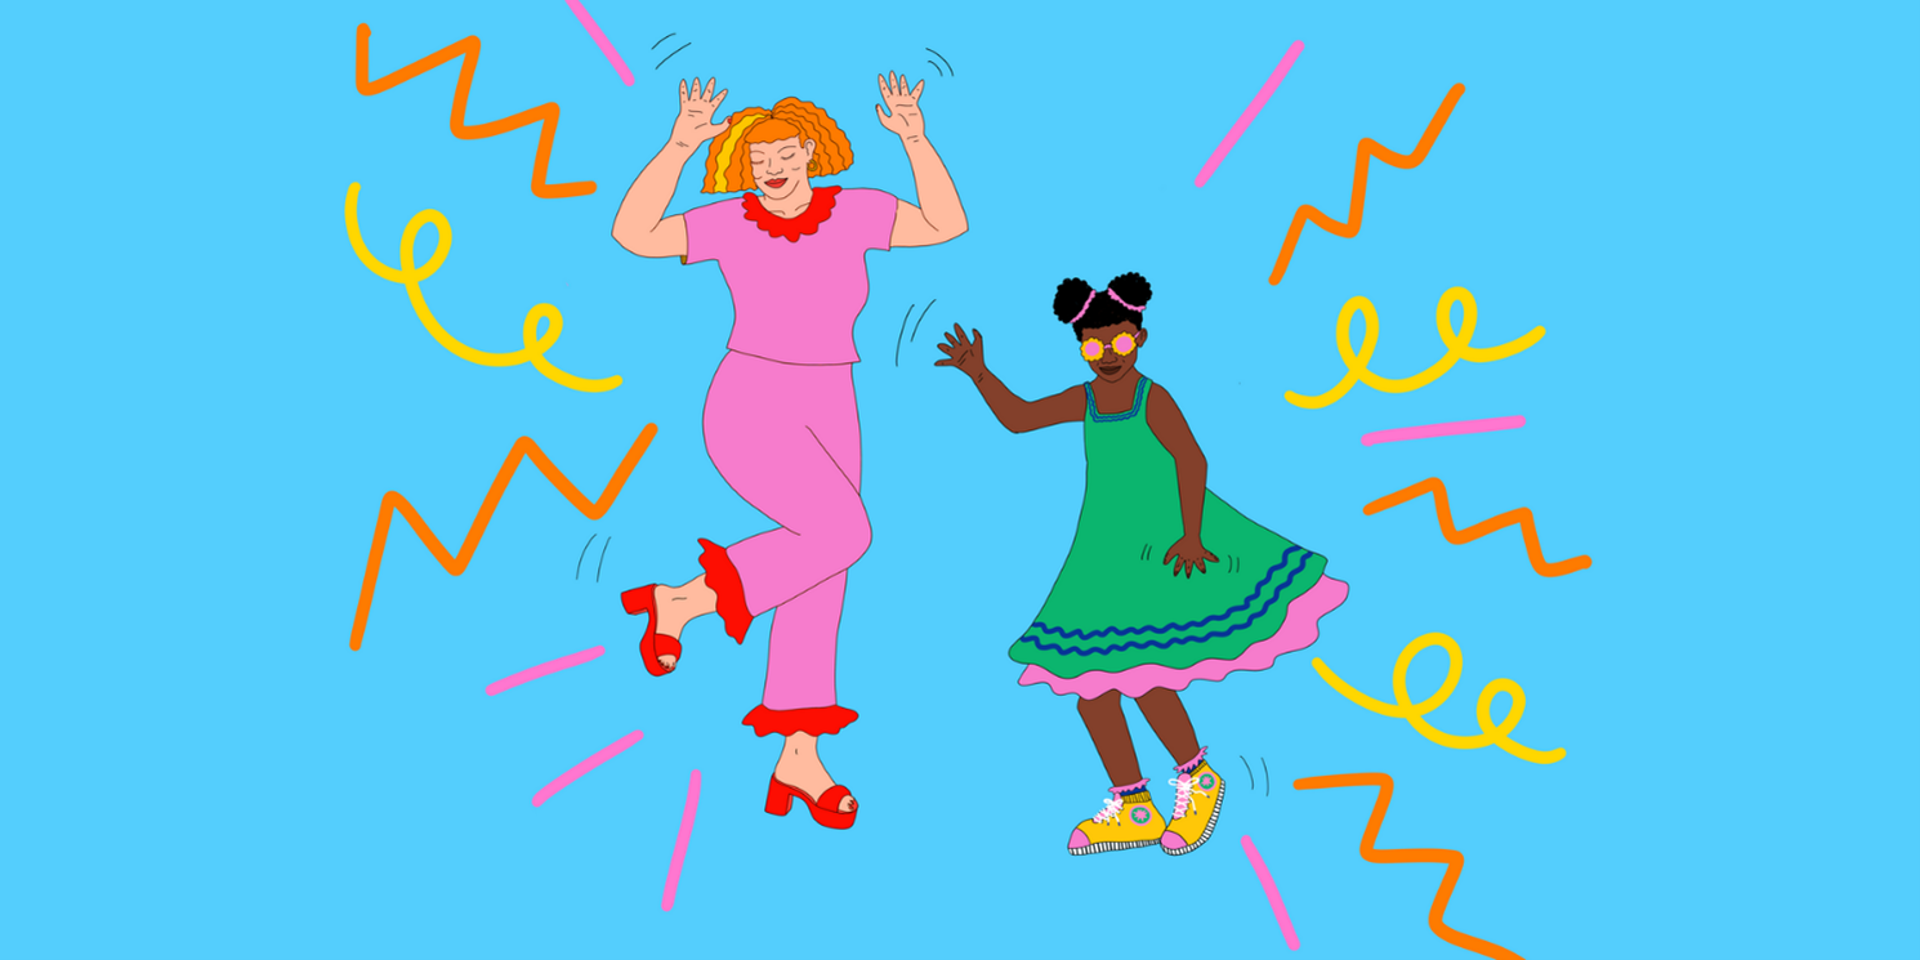 two female dancing illustrations on blue background